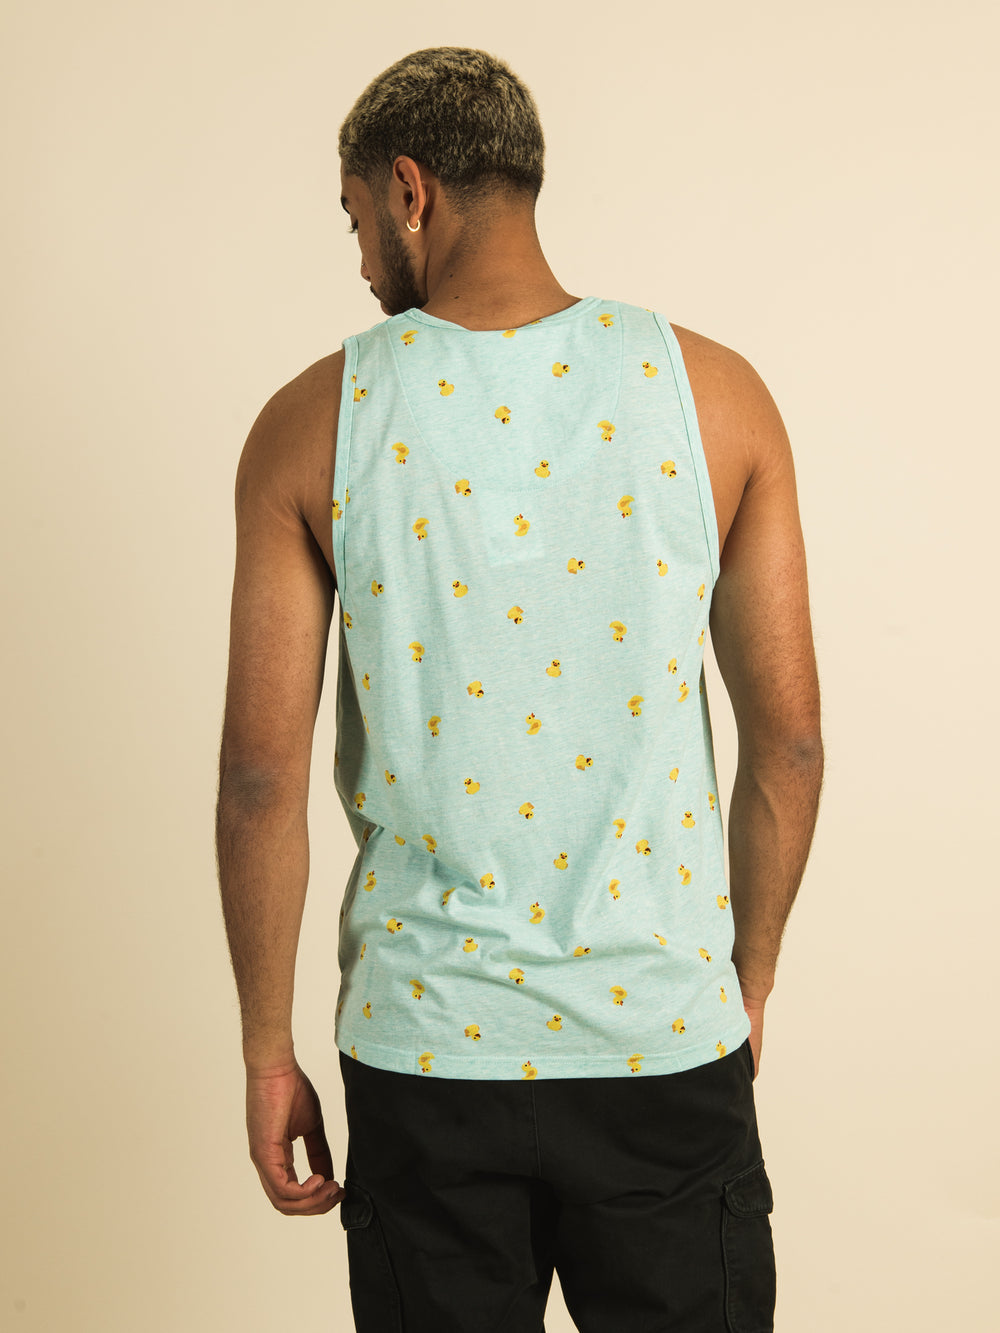 KOLBY SCATTER PRINT TANK TOP  - CLEARANCE